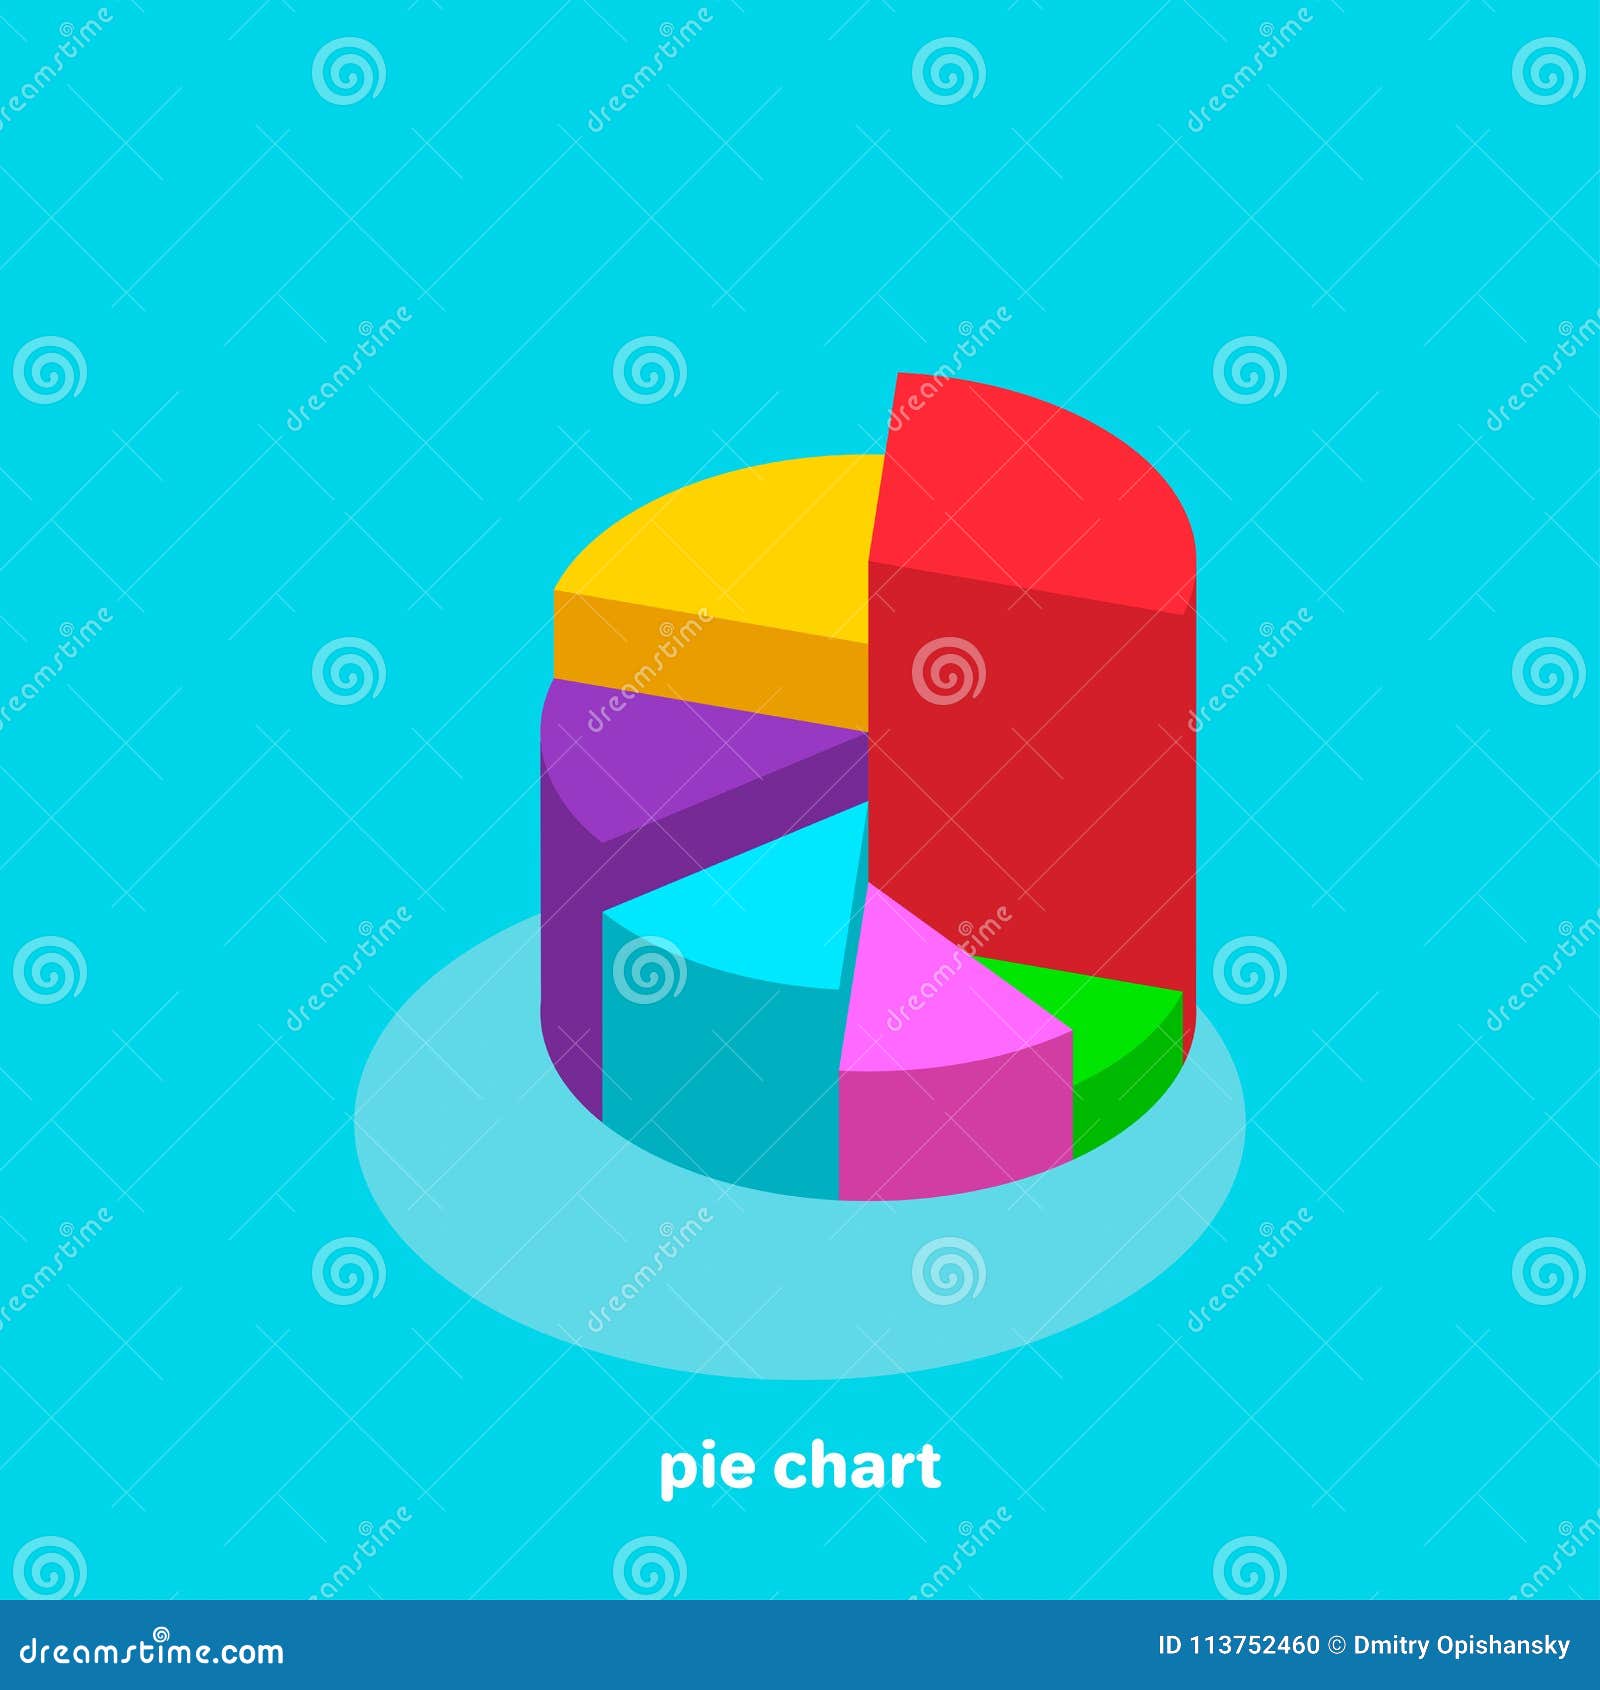 Charts Are Made Up Of Different Parts Or